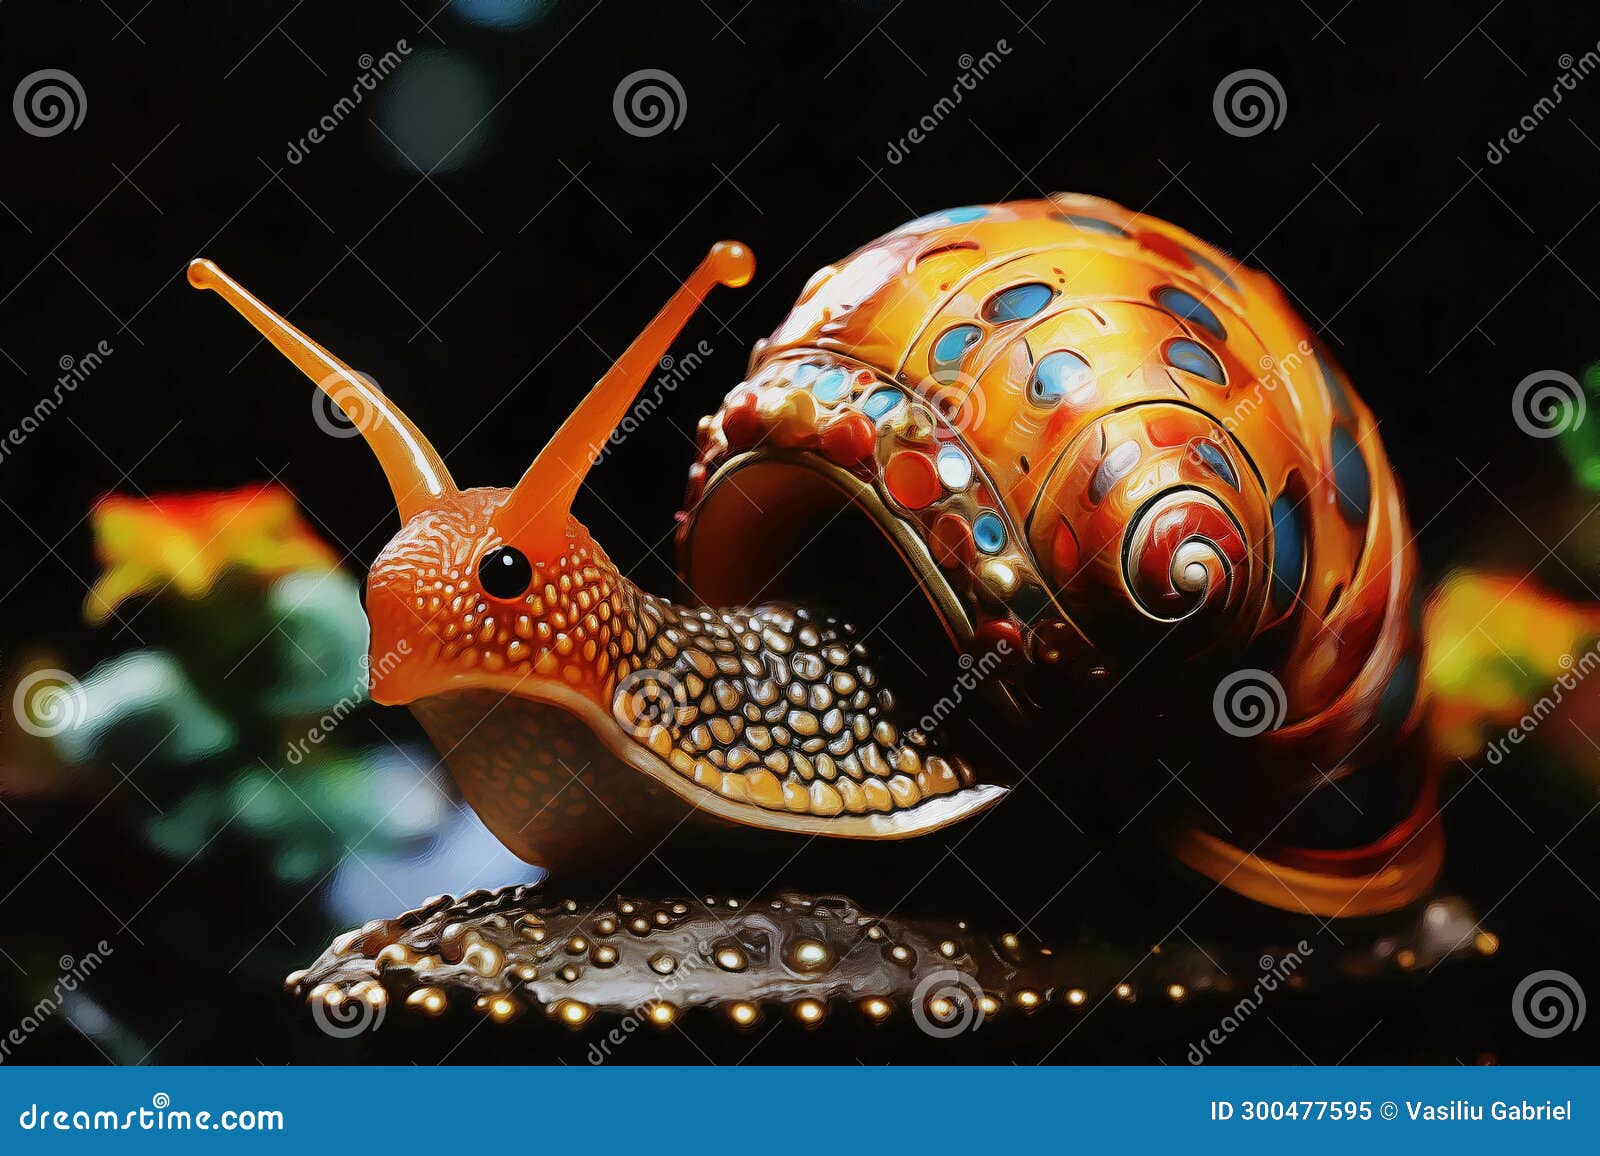 A beautiful intricate unicorn snail cute fantasy character with a shell of pure shining gold. Cute Inspirations